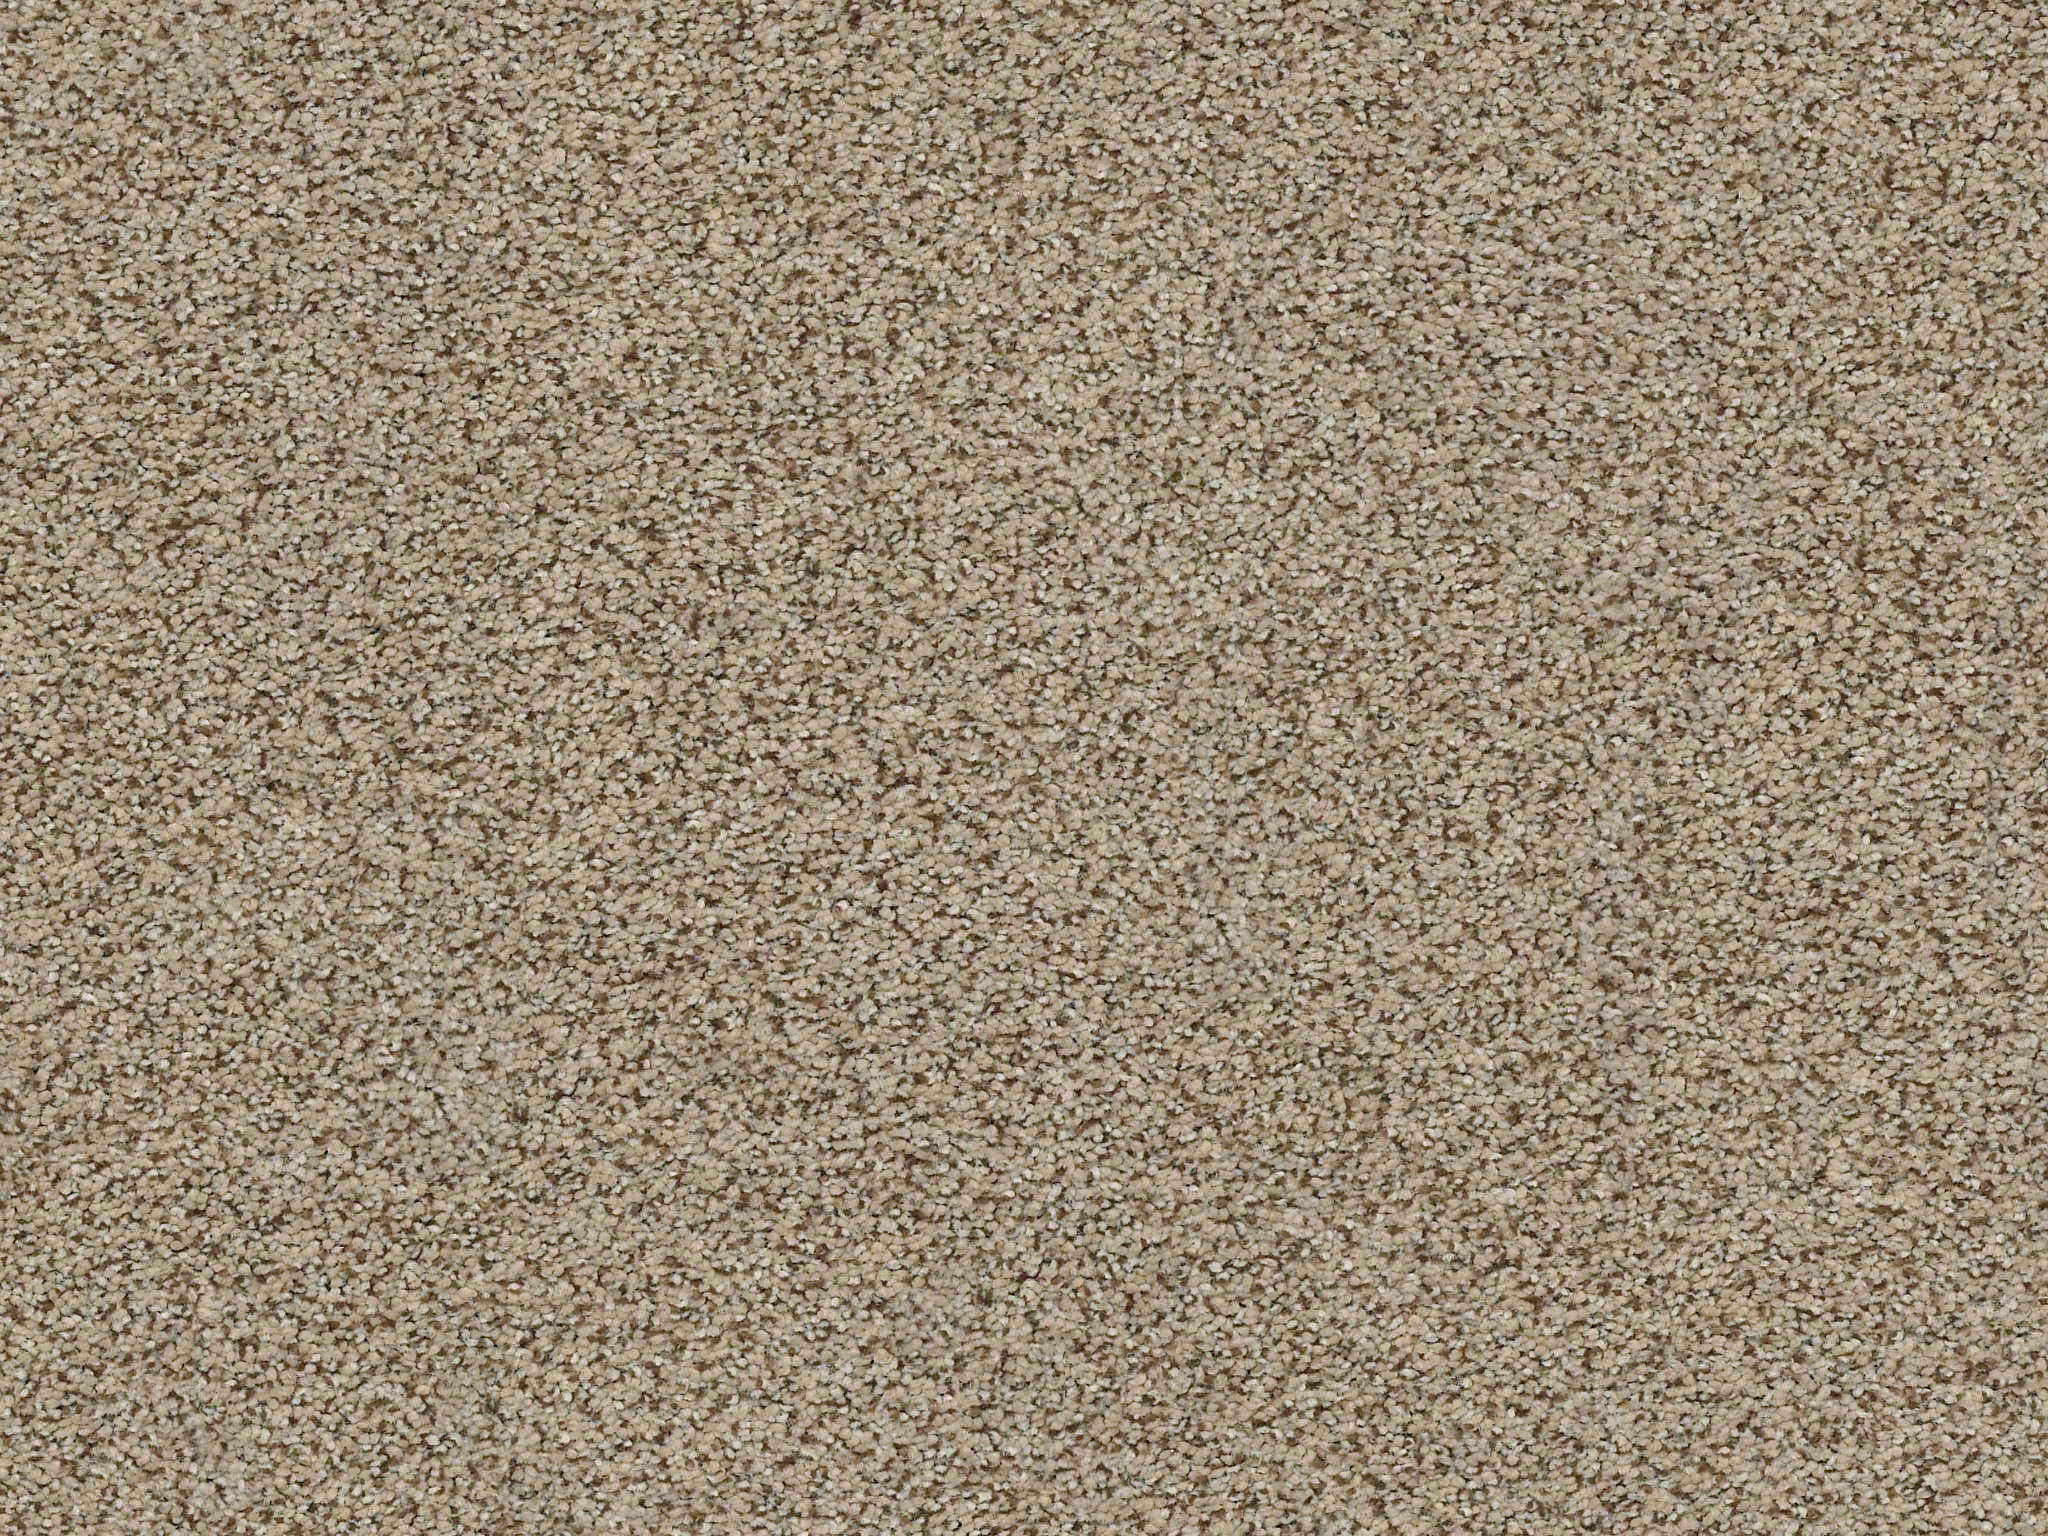 Serenity Cove Carpet - Hiking Trail Zoomed Swatch Thumbnail